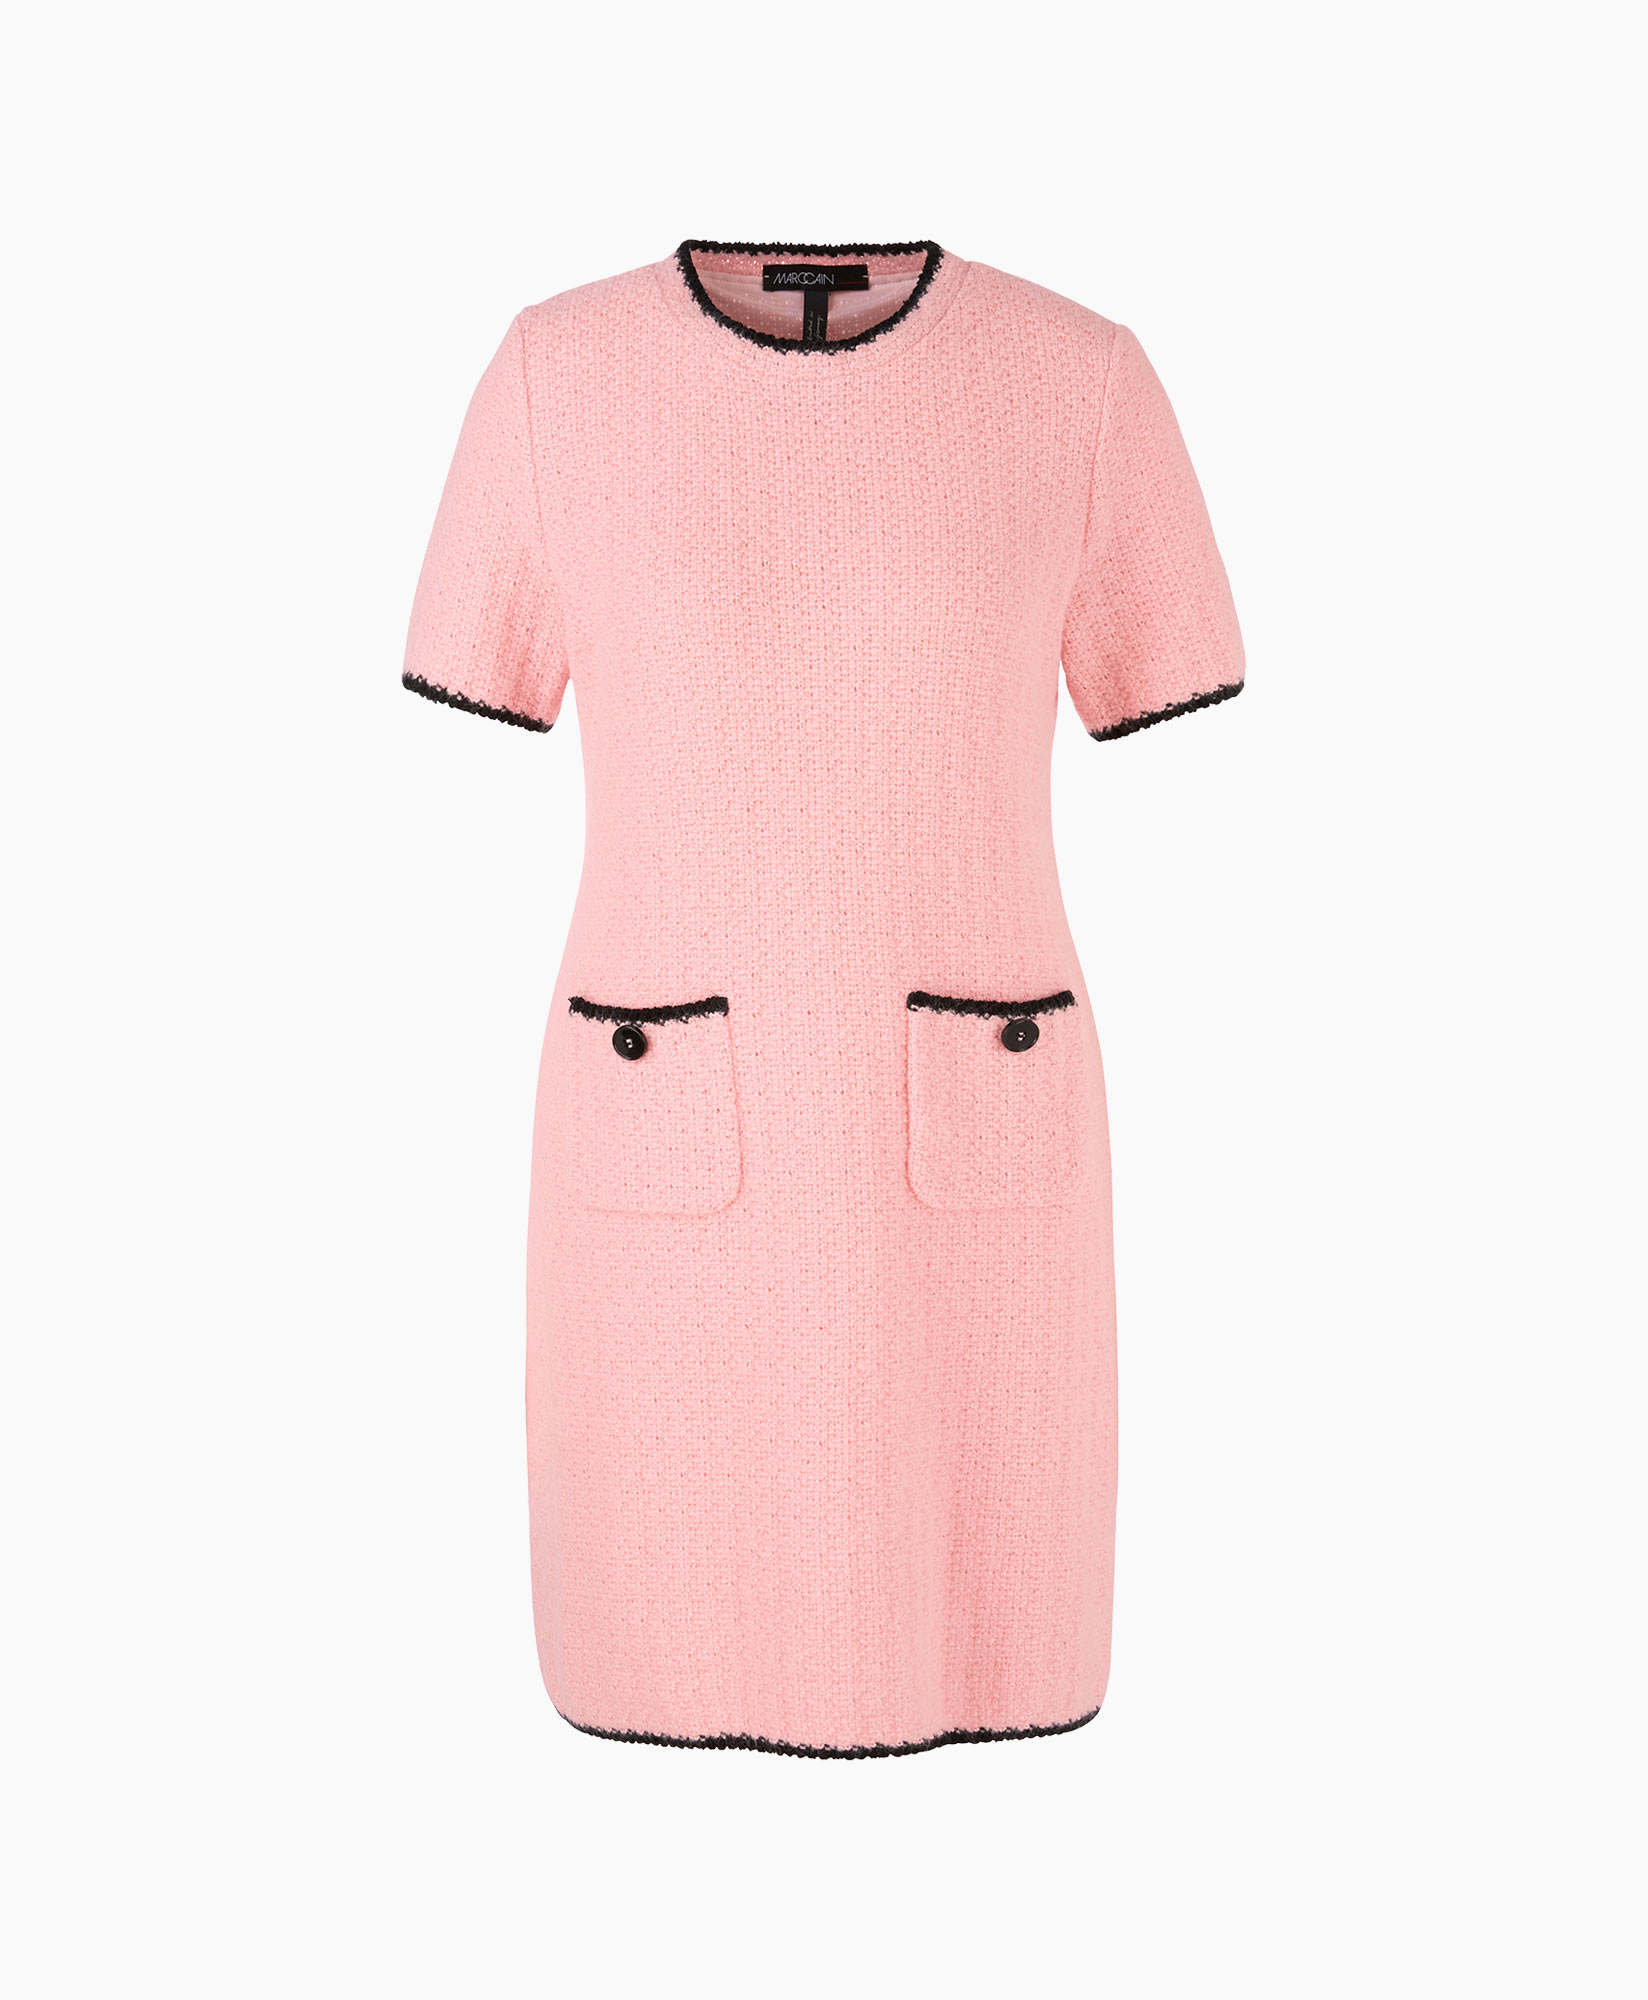 Marccain Collectie Jurk Vc 21.02 M02 Pink